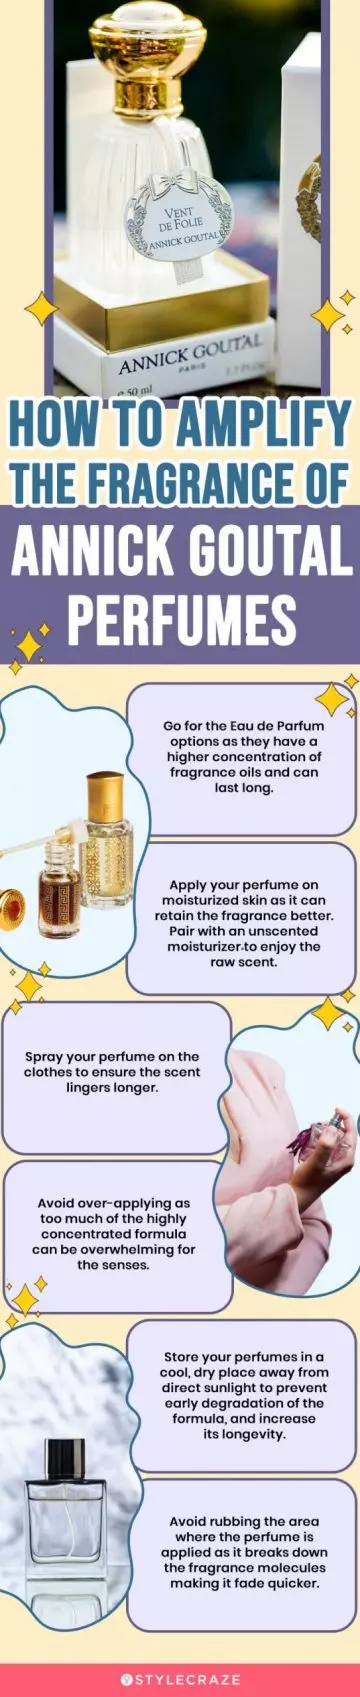 How To Amplify The Fragrance Of Annick Goutal Perfumes (infographic)